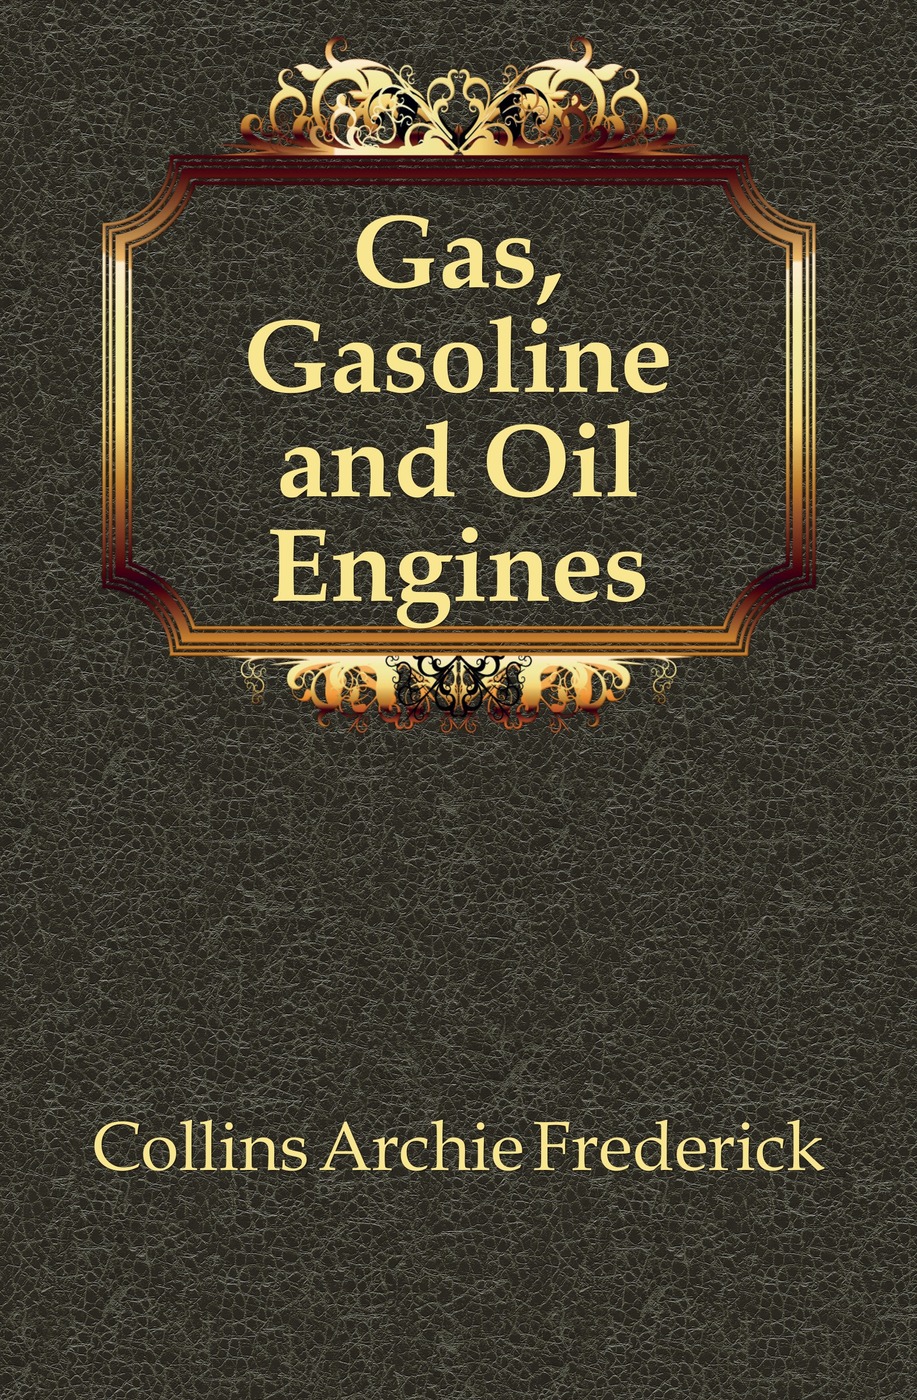 Gas, Gasoline and Oil Engines